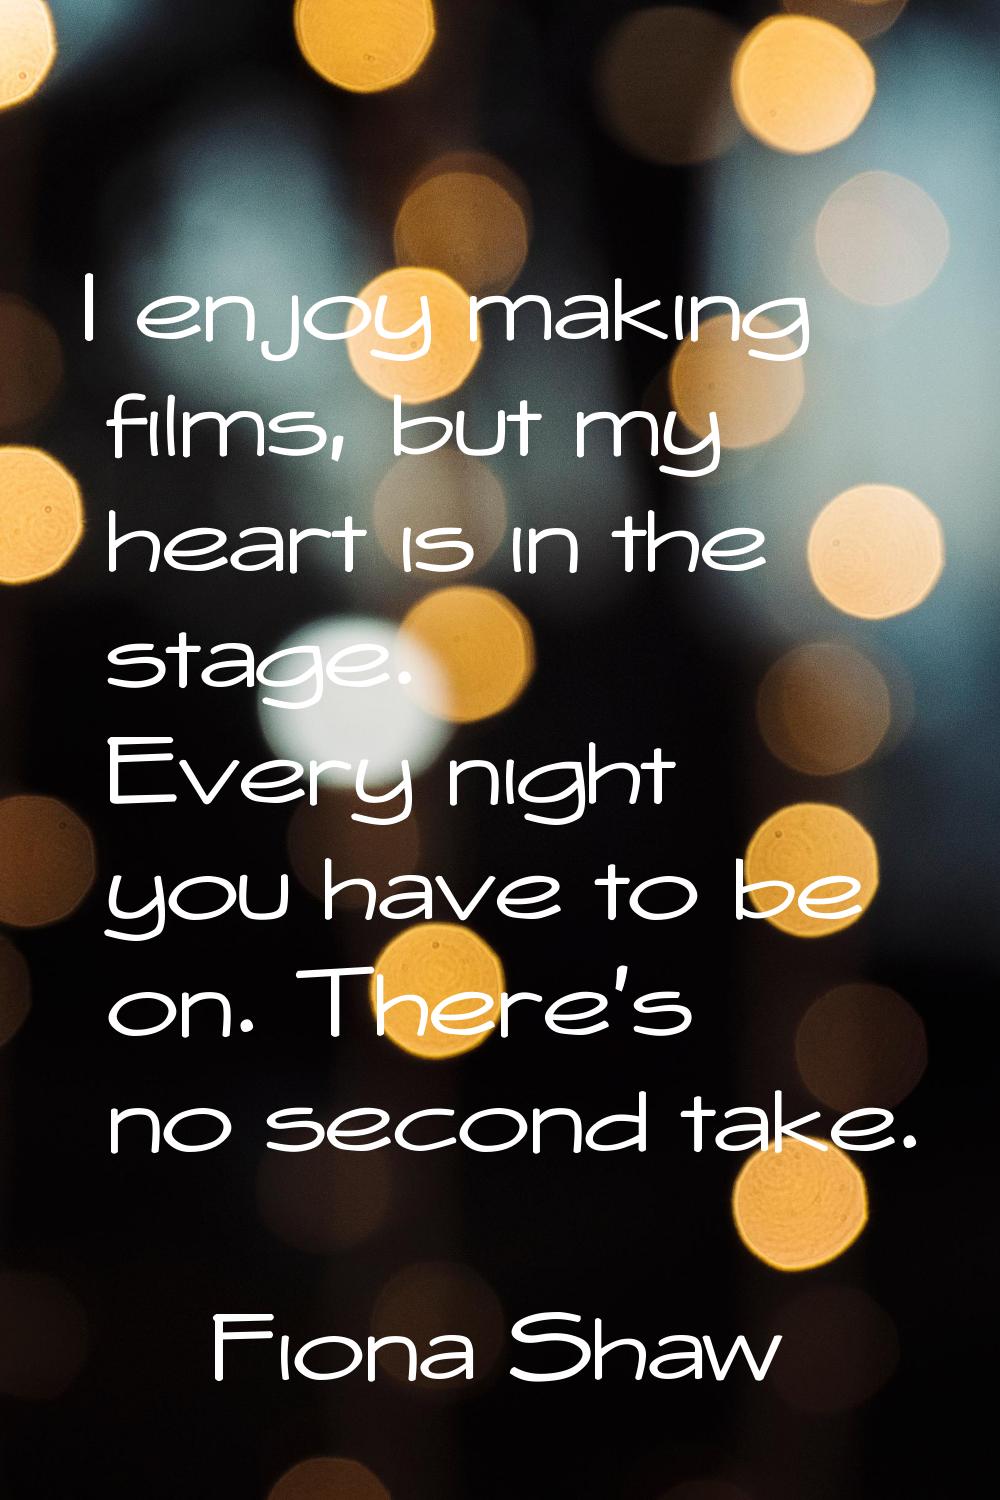 I enjoy making films, but my heart is in the stage. Every night you have to be on. There's no secon